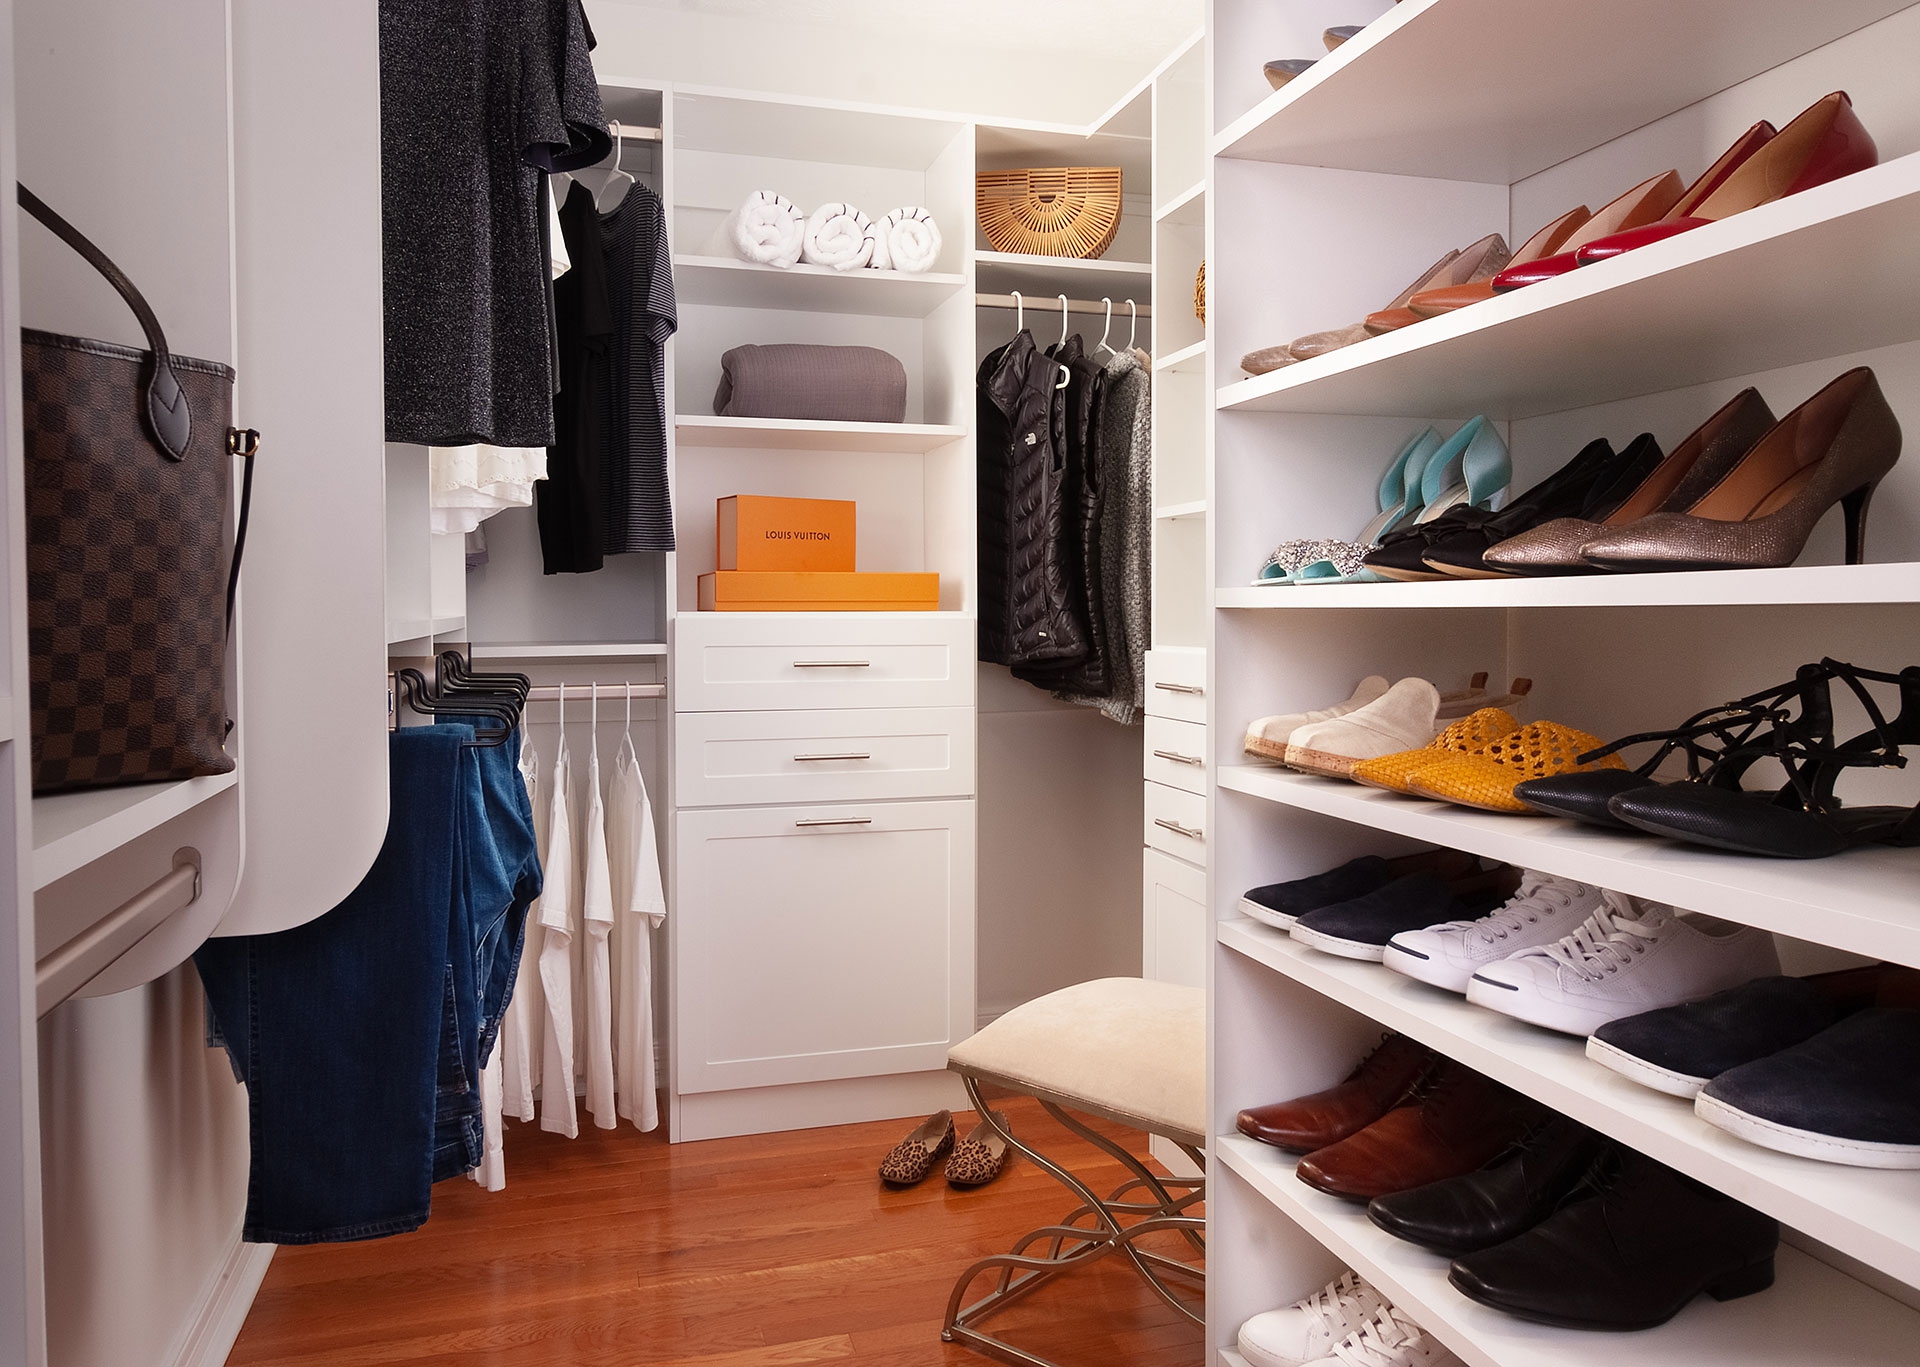 Build out your closets and gain storage